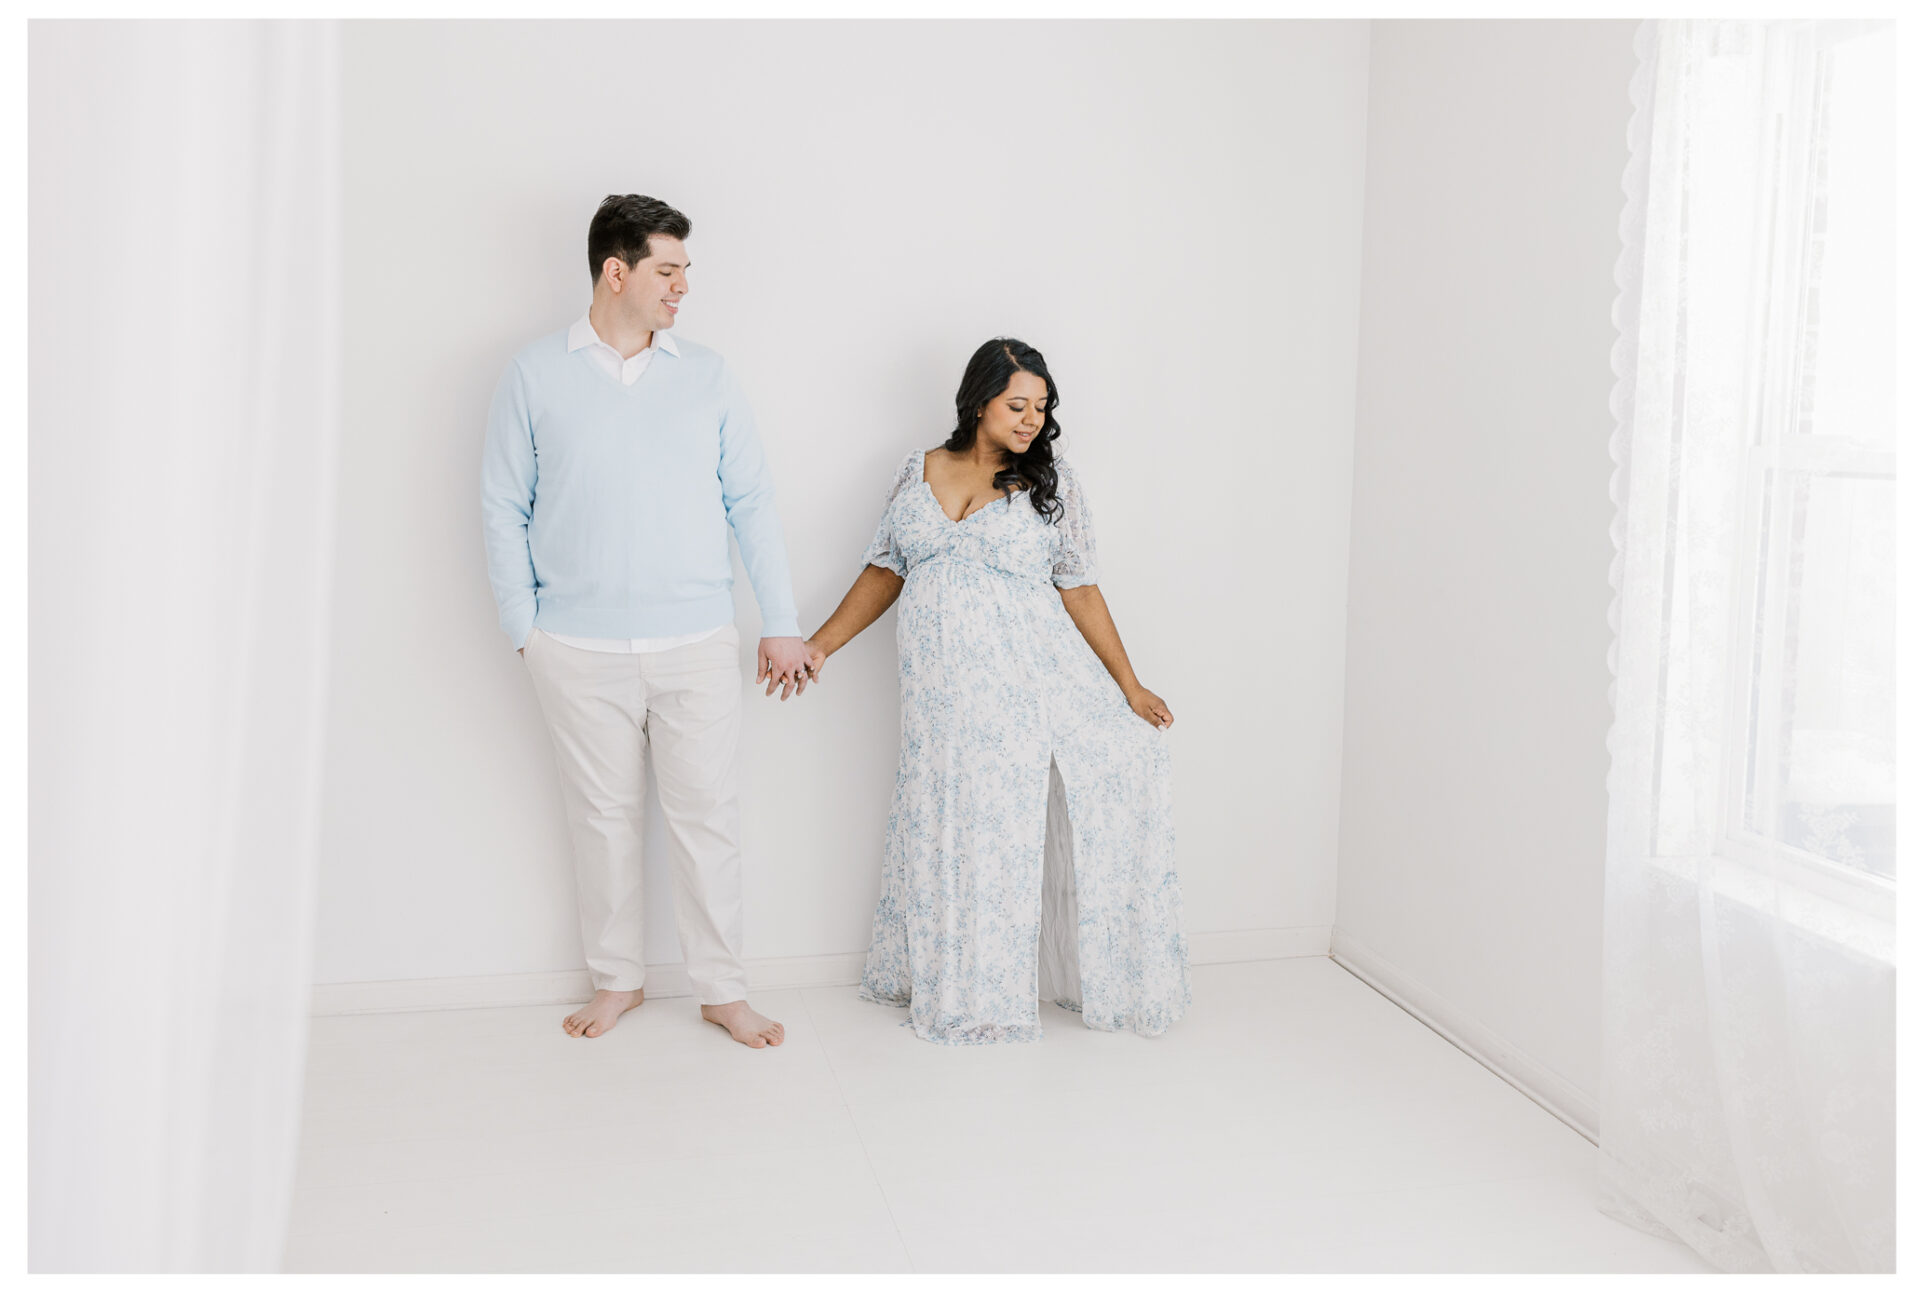 An expecting mother and her husband posing in front of.a white studio wall during a maternity session